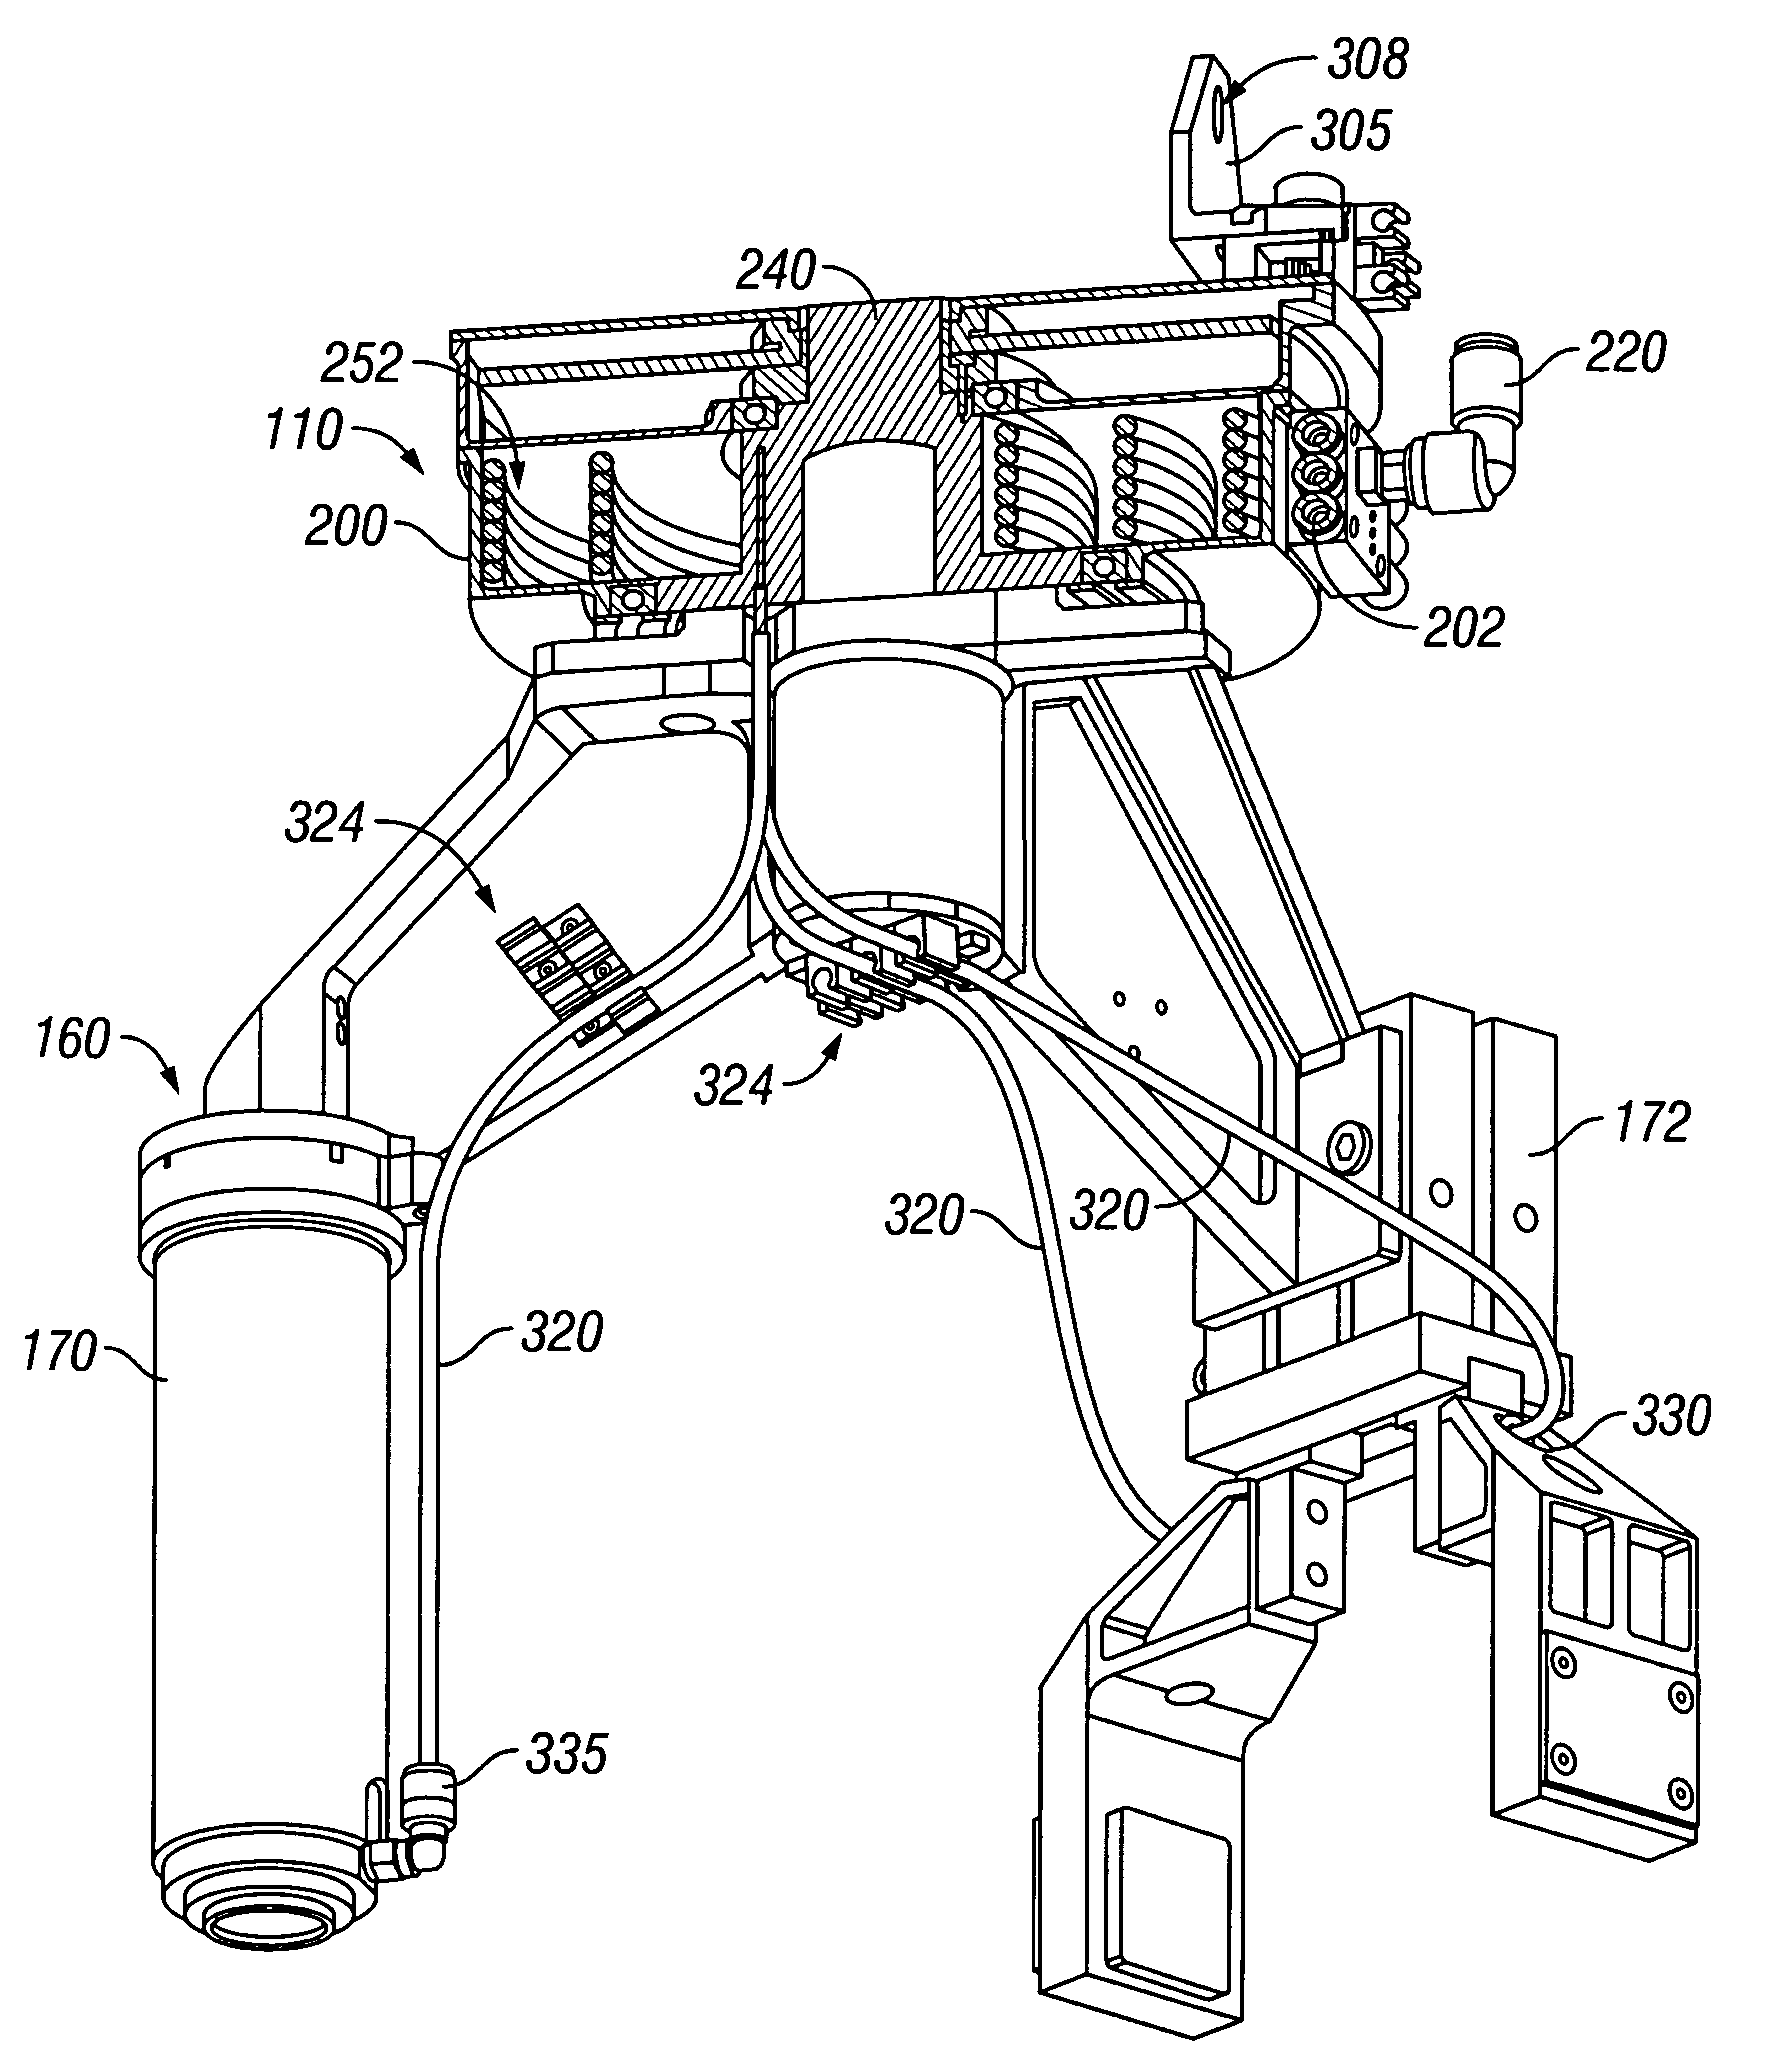 Pressure transmission assembly for mounting to a robotic device having a rotatable end effector